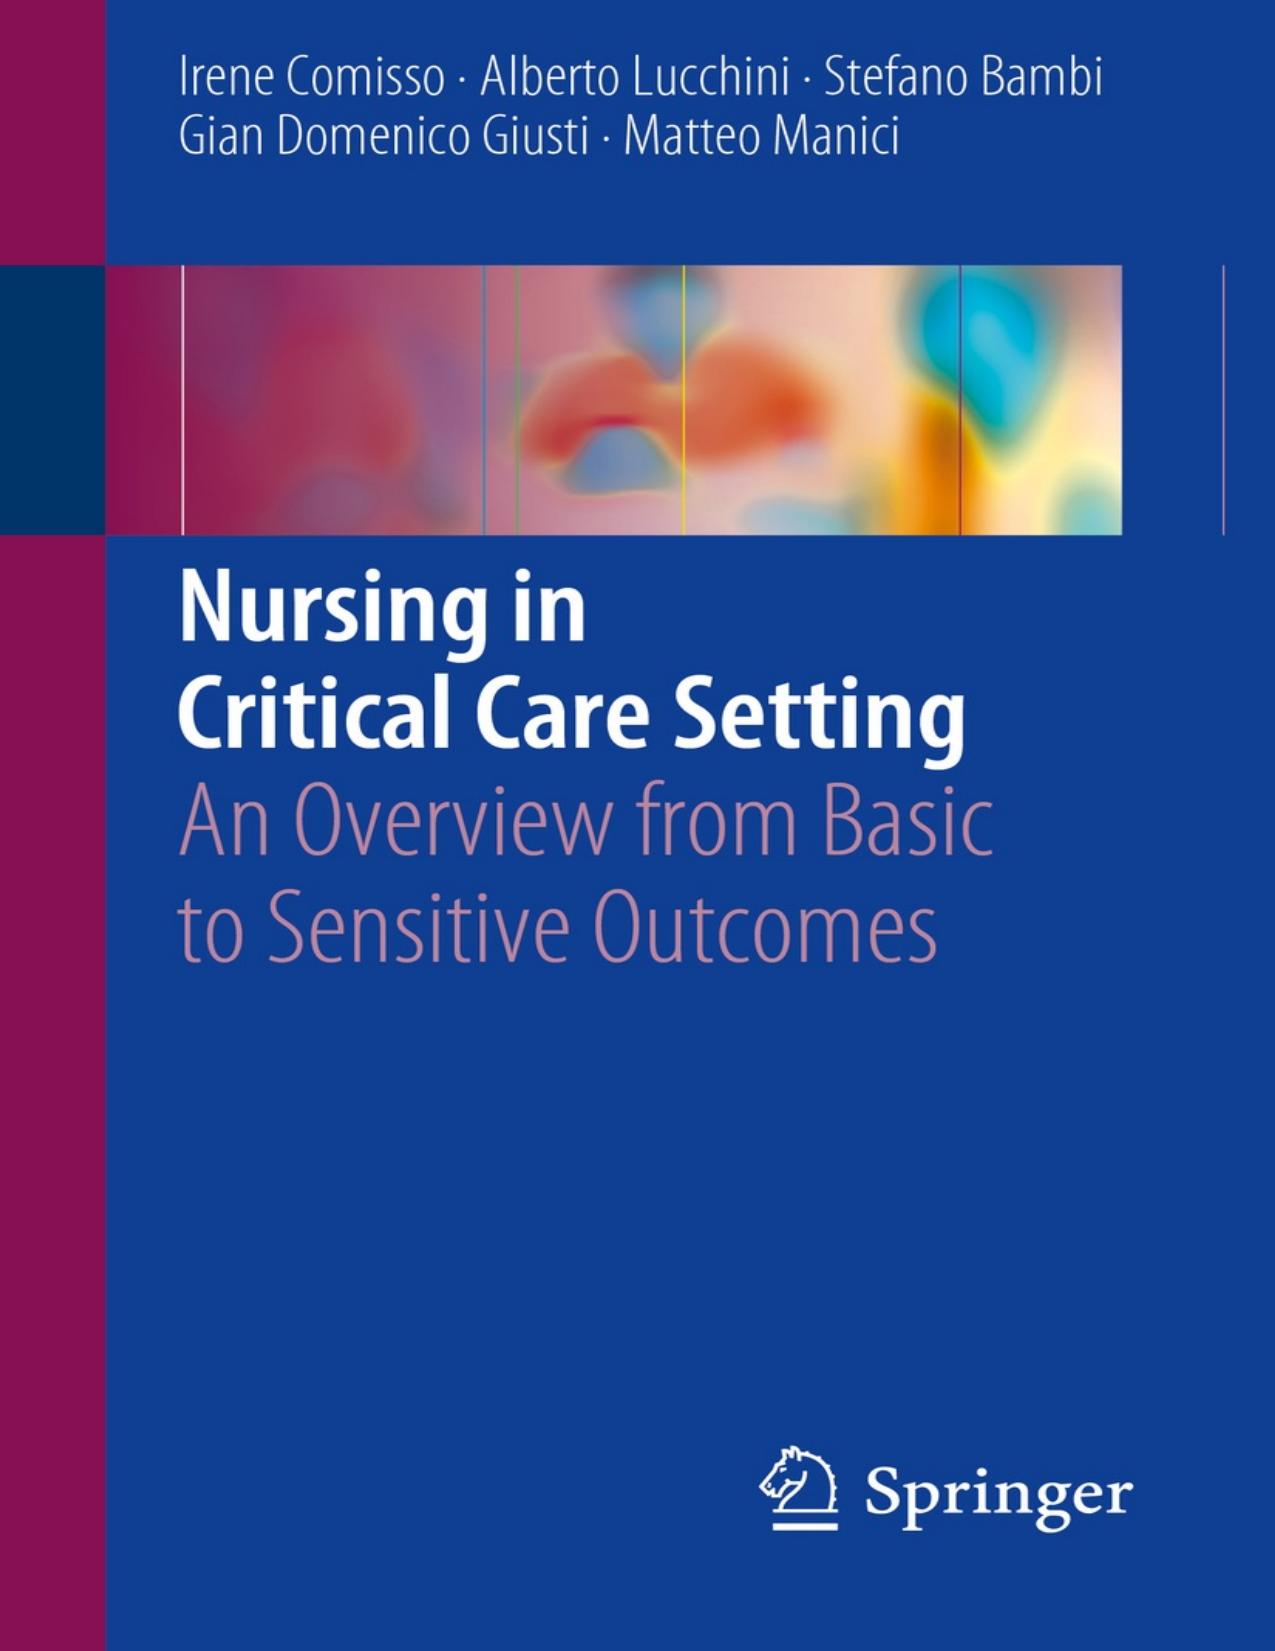 Nursing in Critical Care Setting: An Overview from Basic to Sensitive Outcomes - PDFDrive.com